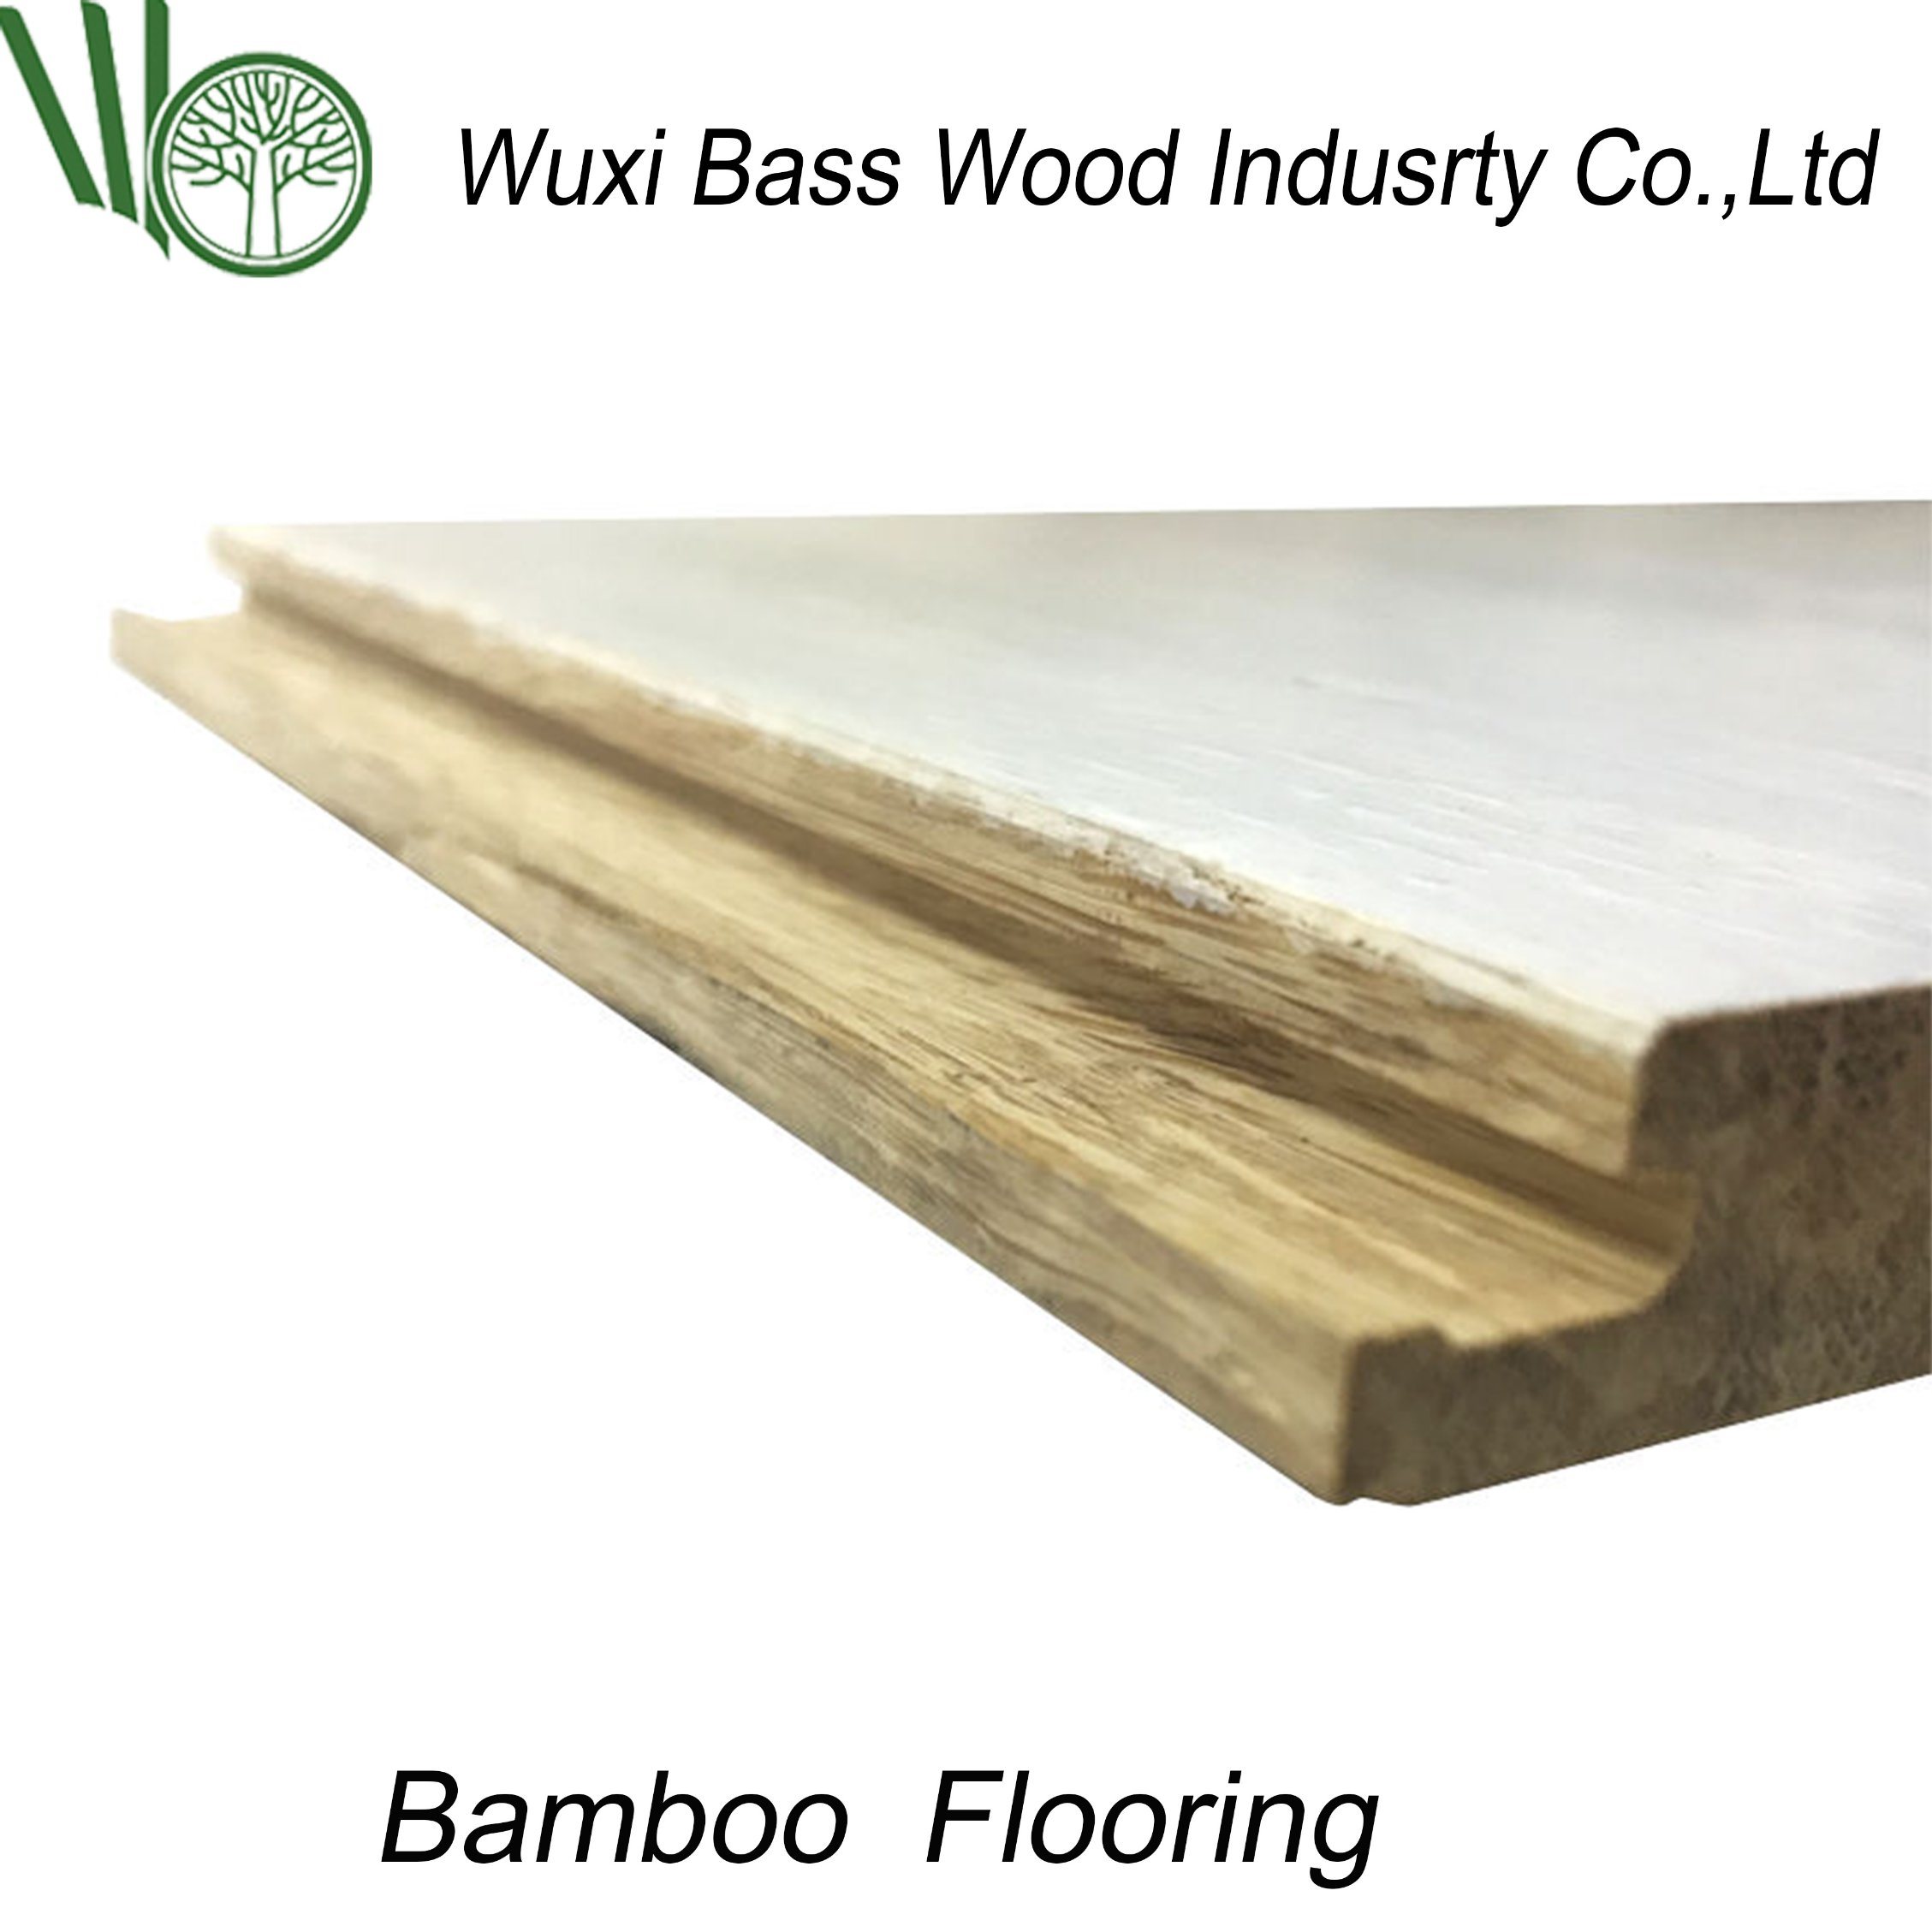 The Customized Bamboo Flooring with Low Price